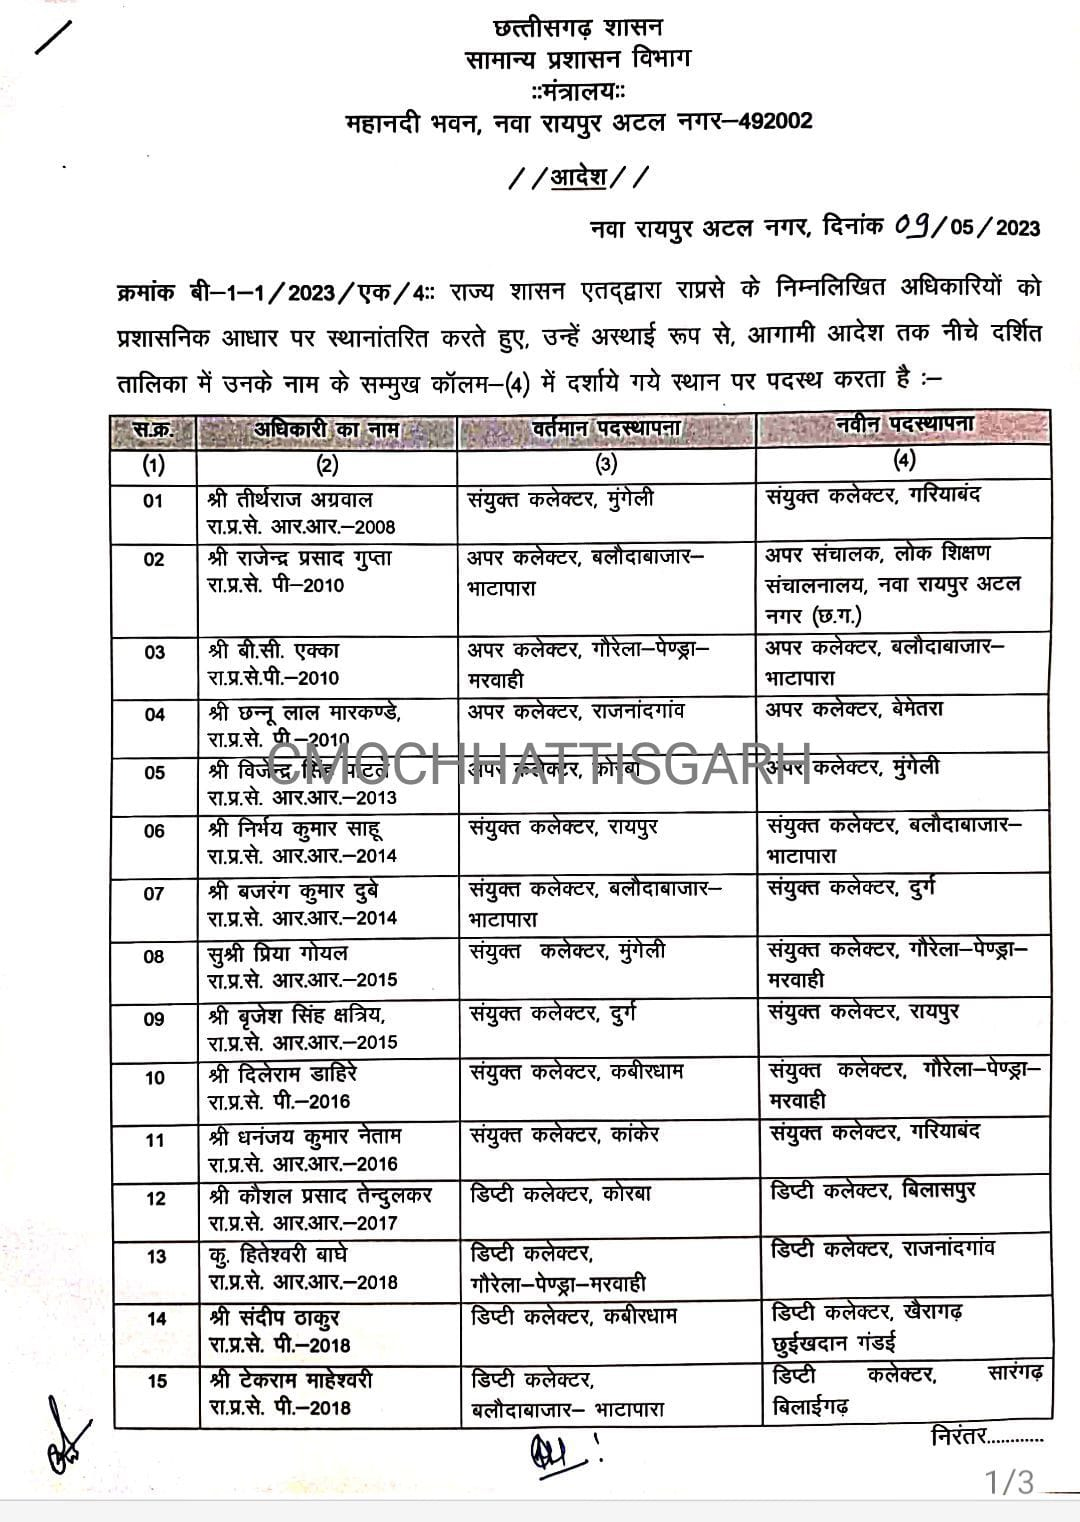 Breaking News, Government of Chhattisgarh, big reshuffle, charge changed of 39 administrative officers, Khabargali